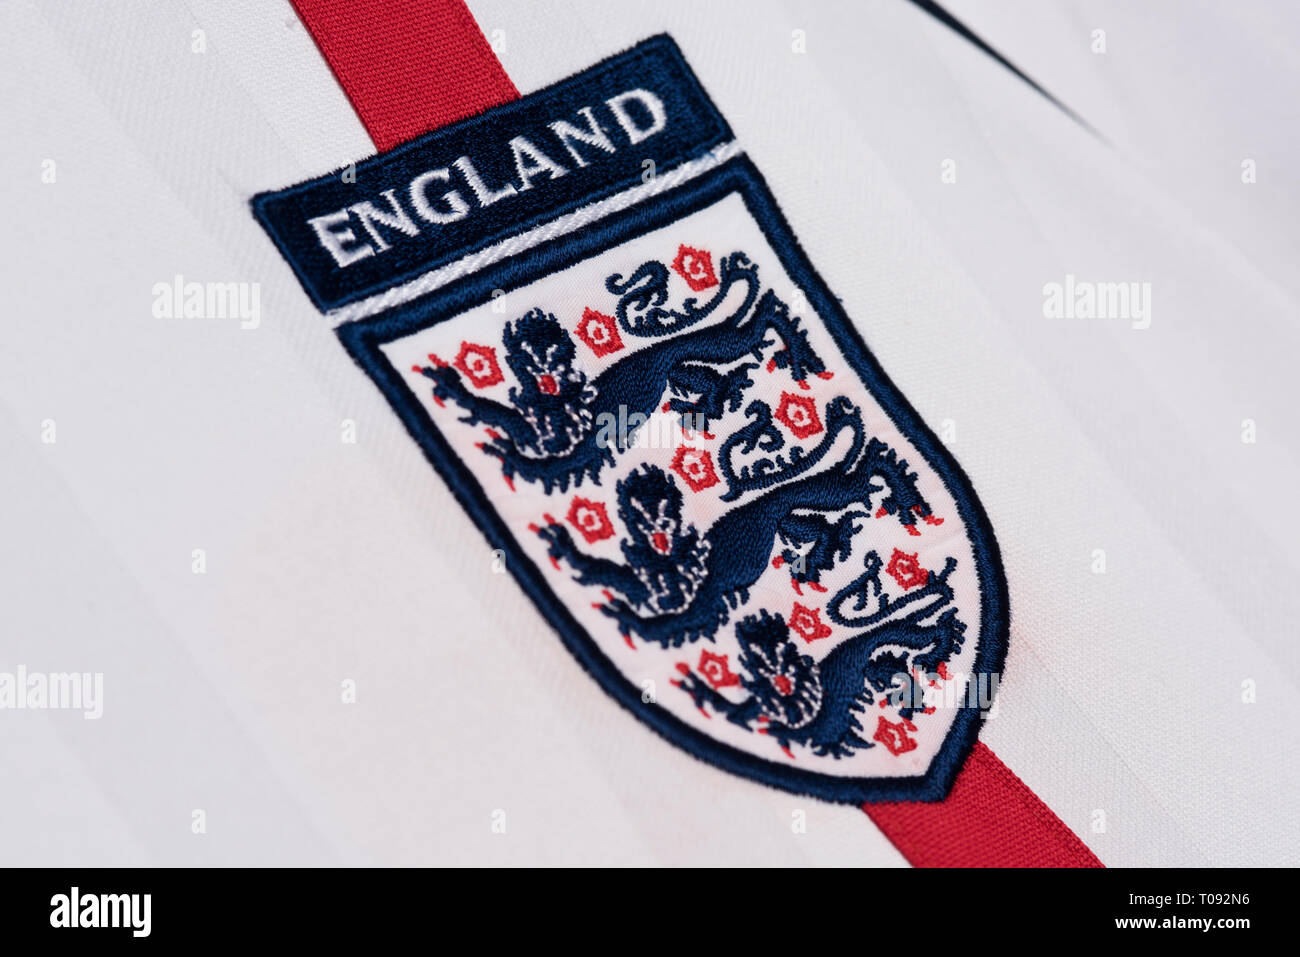 Close up of replica England kit for the FIFA 2002 World Cup in Japan and South Korea. Stock Photo